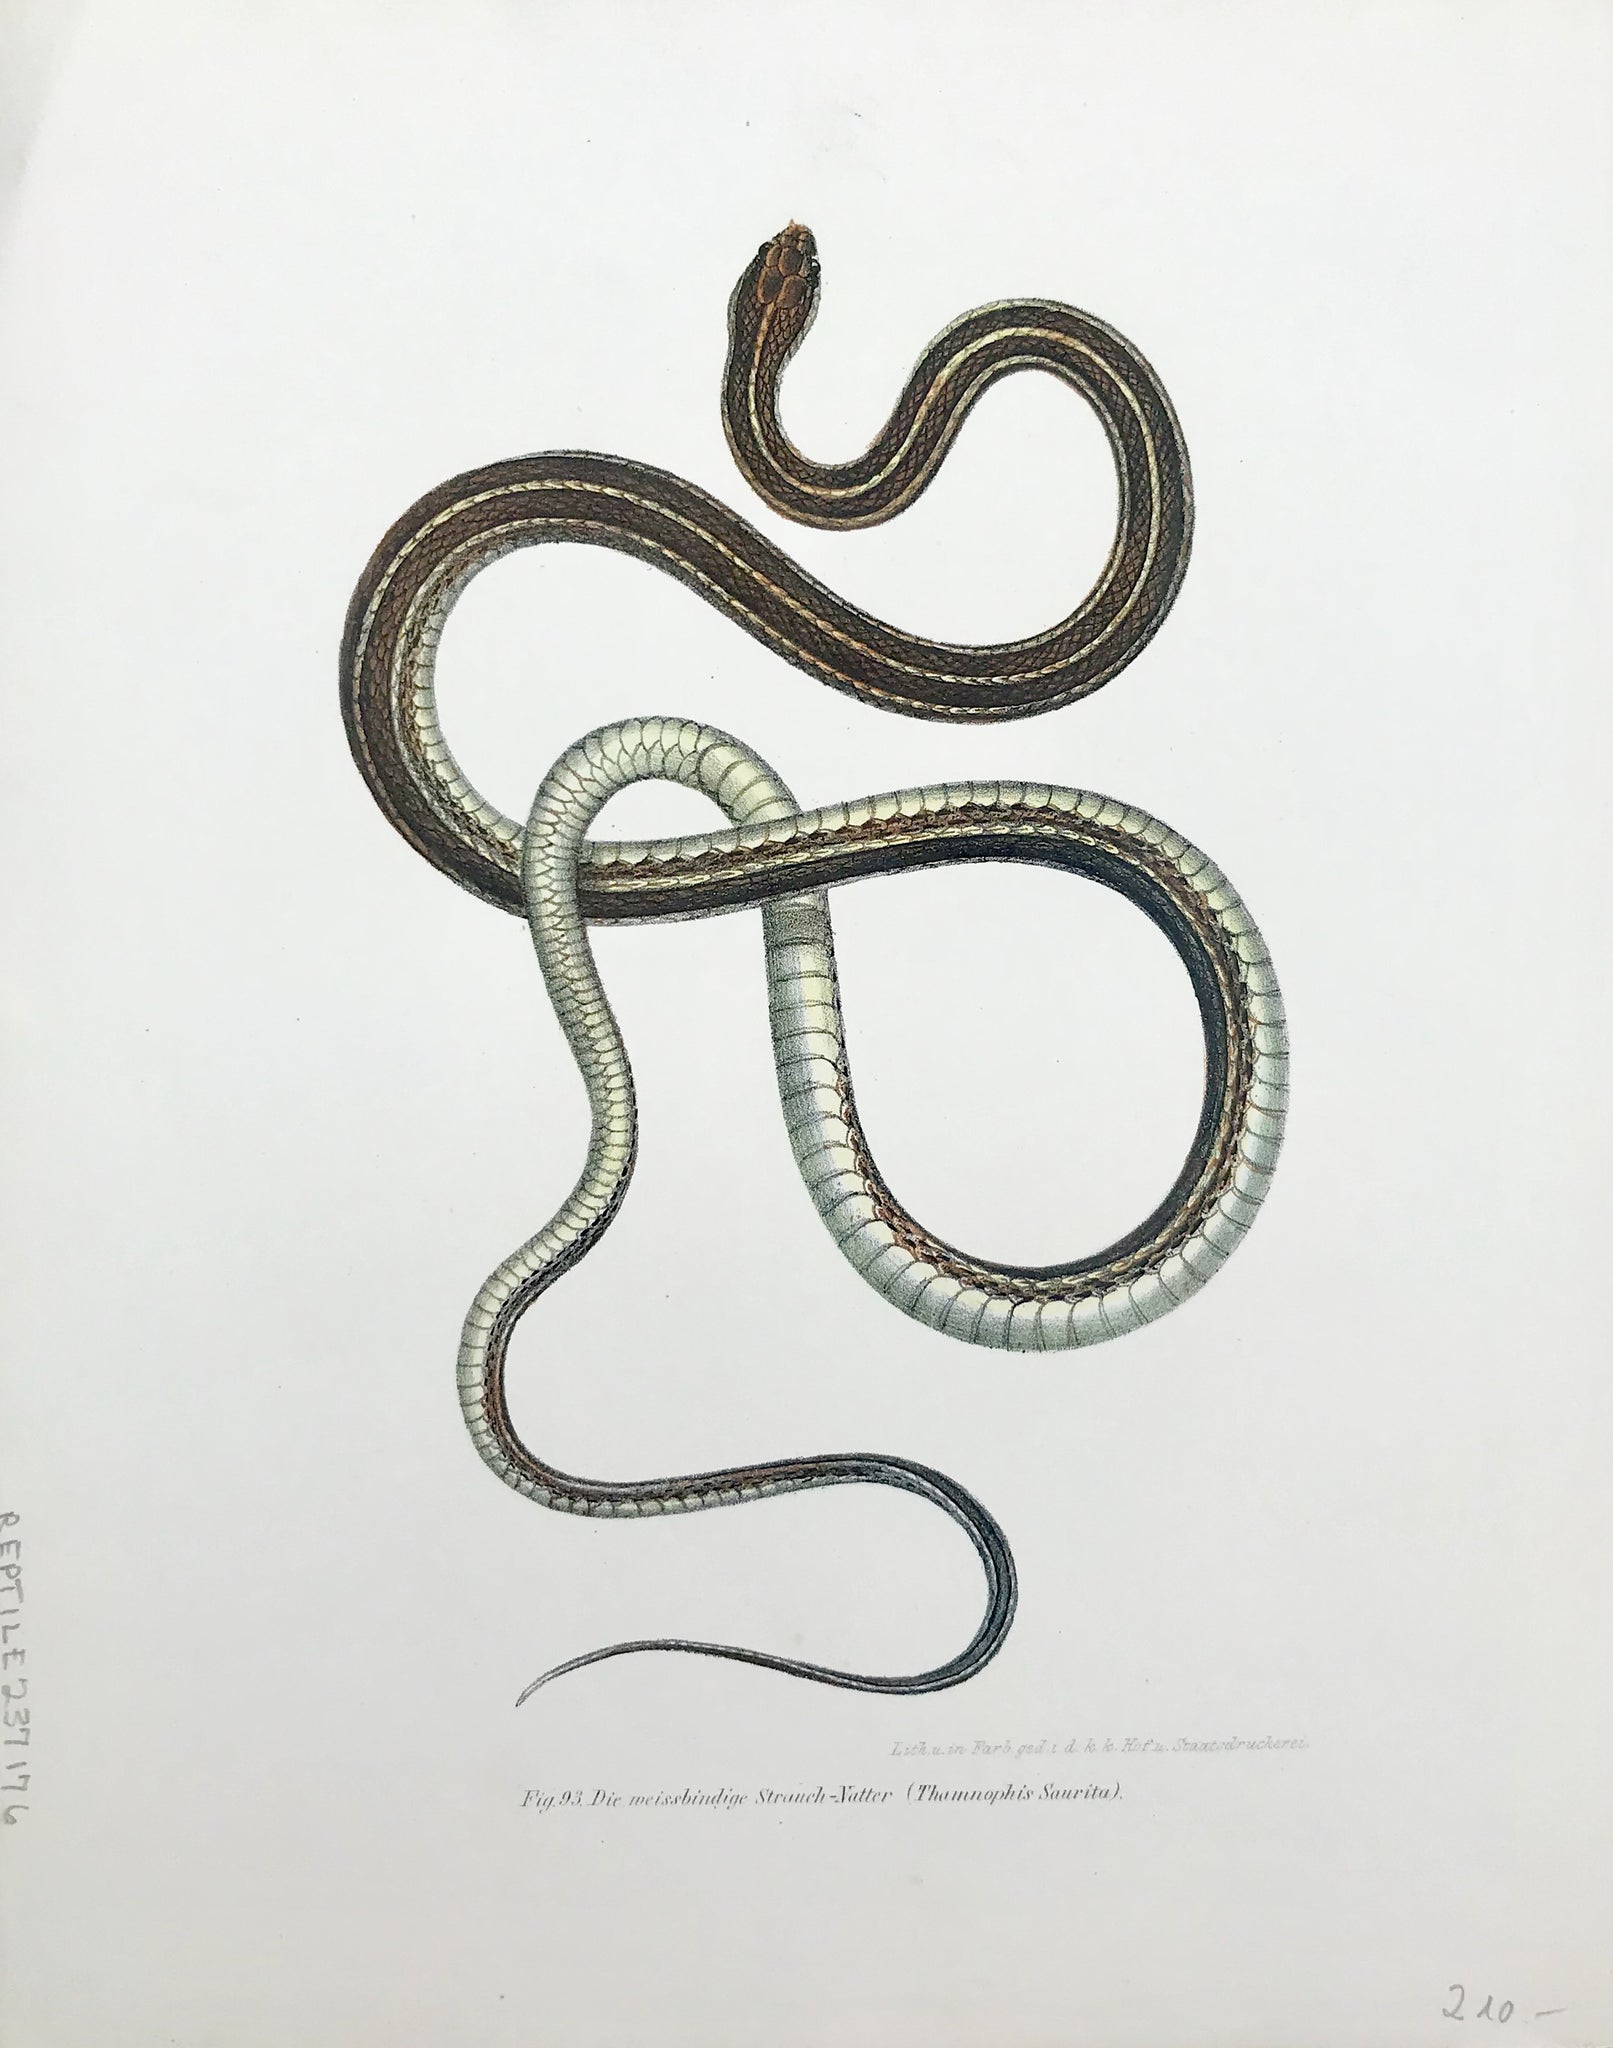 "Die weisschindige Strauch-Natter (Thamnophis Saurita)"  Snake lithographs printed in color from:  "Naturgeschichte der Amphibien"  Autor: Leopold Joseph Fitzinger (1802-1884)  Published by Hof- und Staatsdruckerei Vienna, 1864  Page size: 24 x 30.5 cm ( 9.4 x 12 ")  The prints have minor signs of age and use. Special faults are mentioned.   